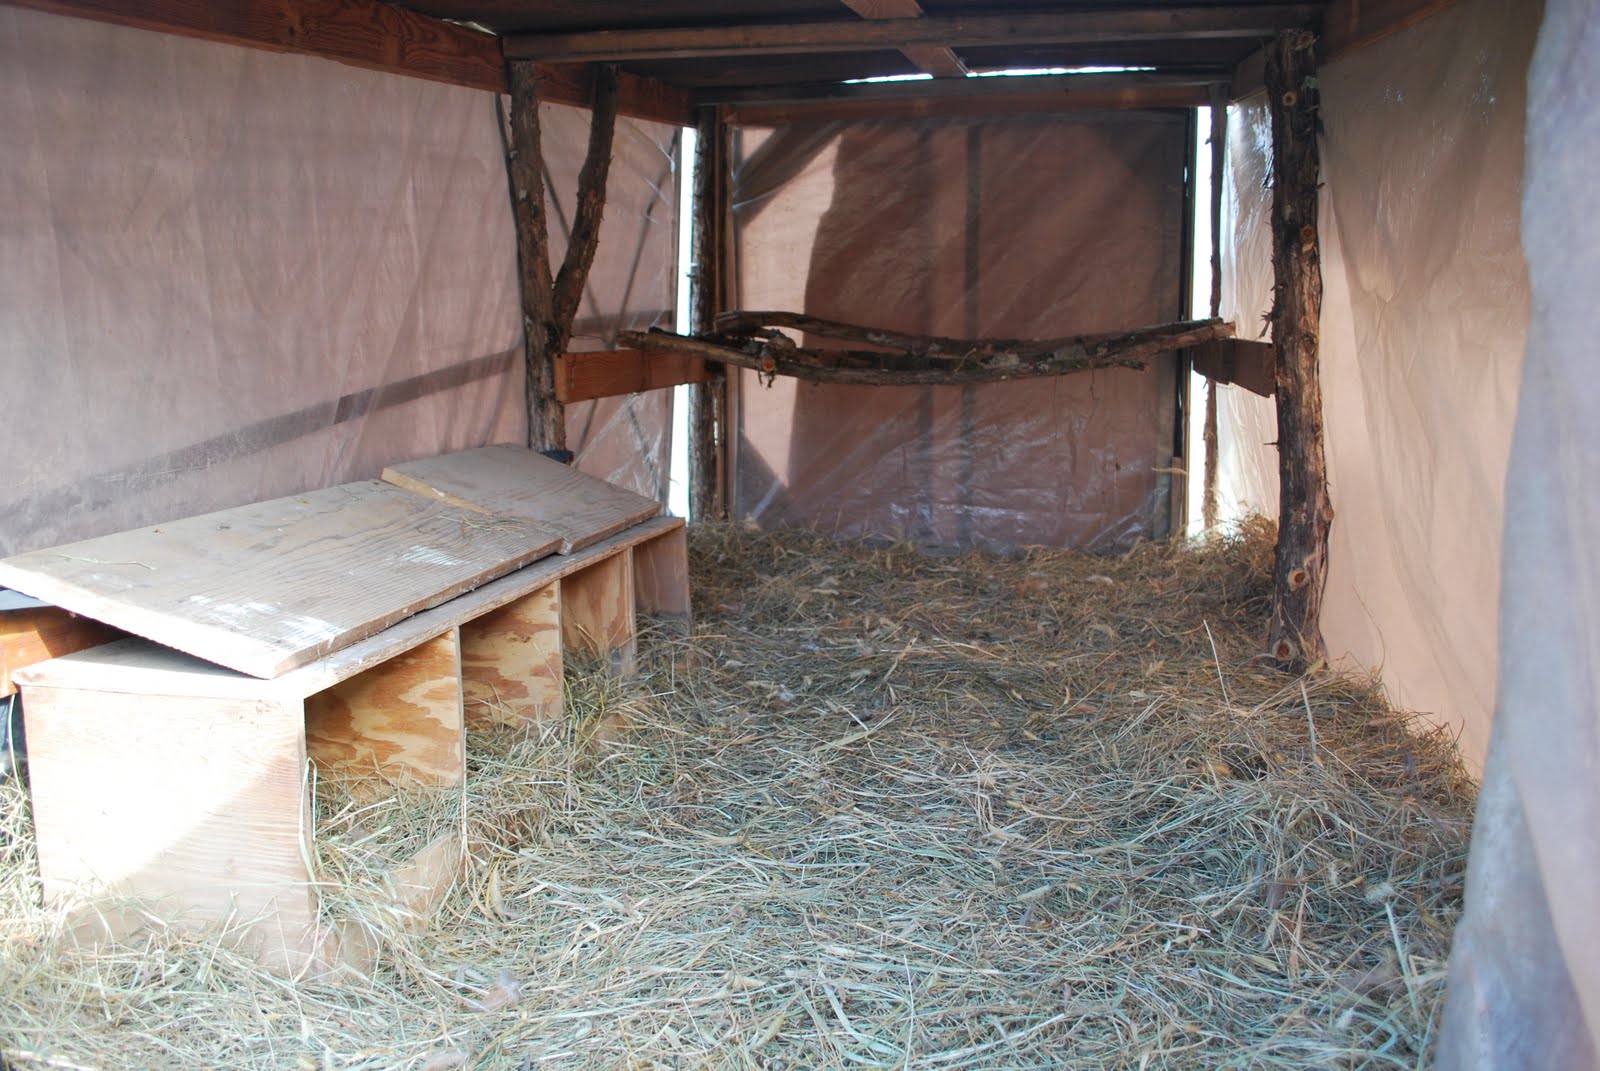 Inside Chicken Coop Here's an inside look at the